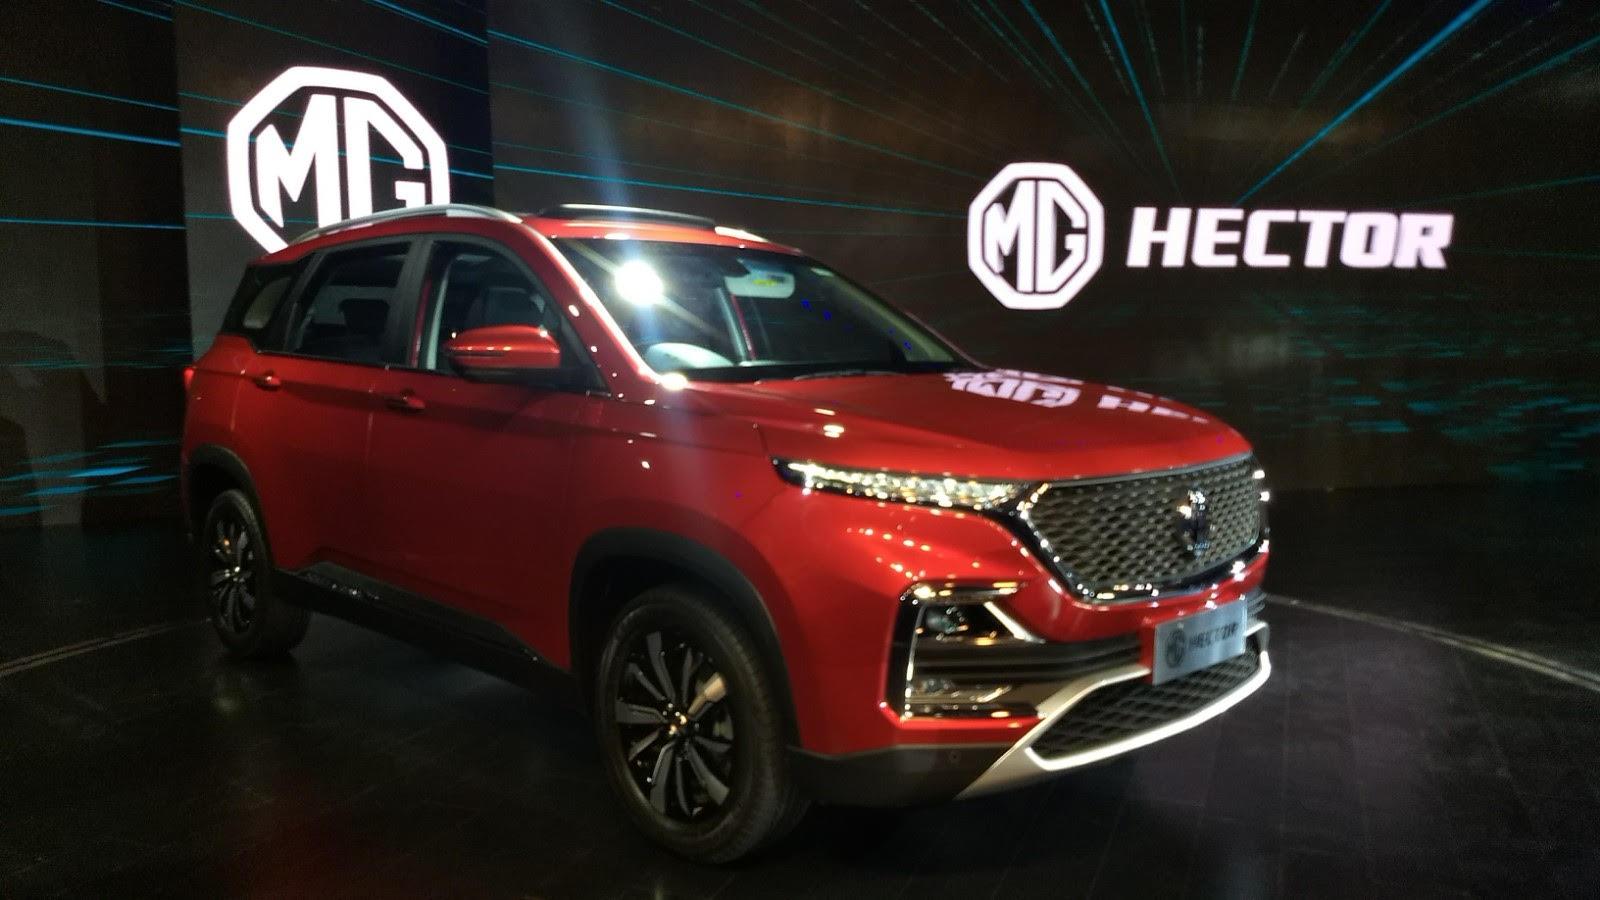 MG Hector SUV officially revealed. Featured loaded